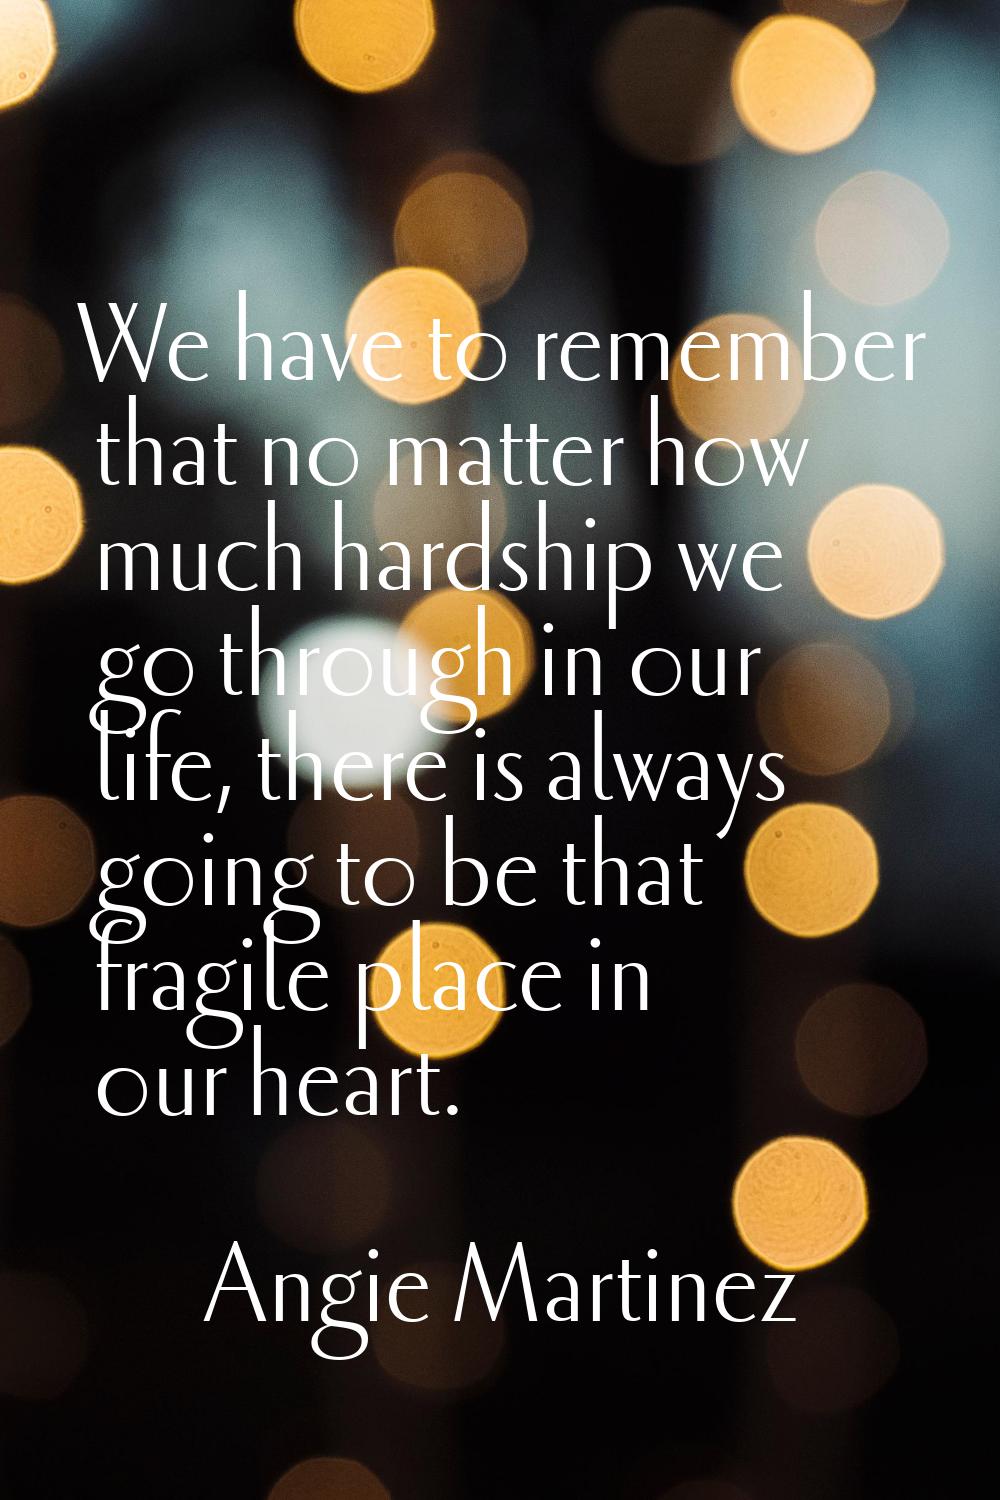 We have to remember that no matter how much hardship we go through in our life, there is always goi